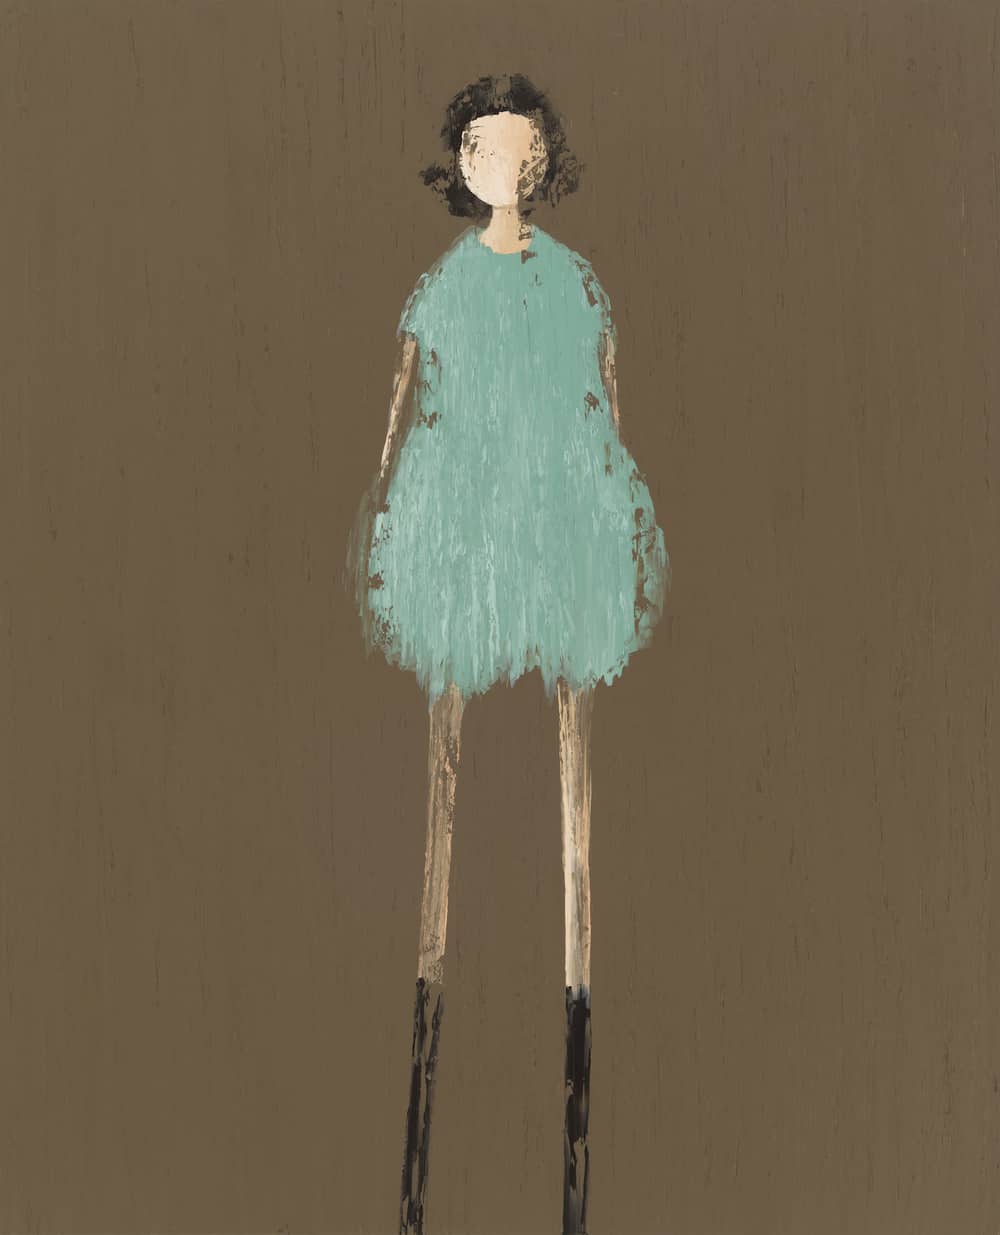 Buy a painting of a girl in green dress called Dixon.